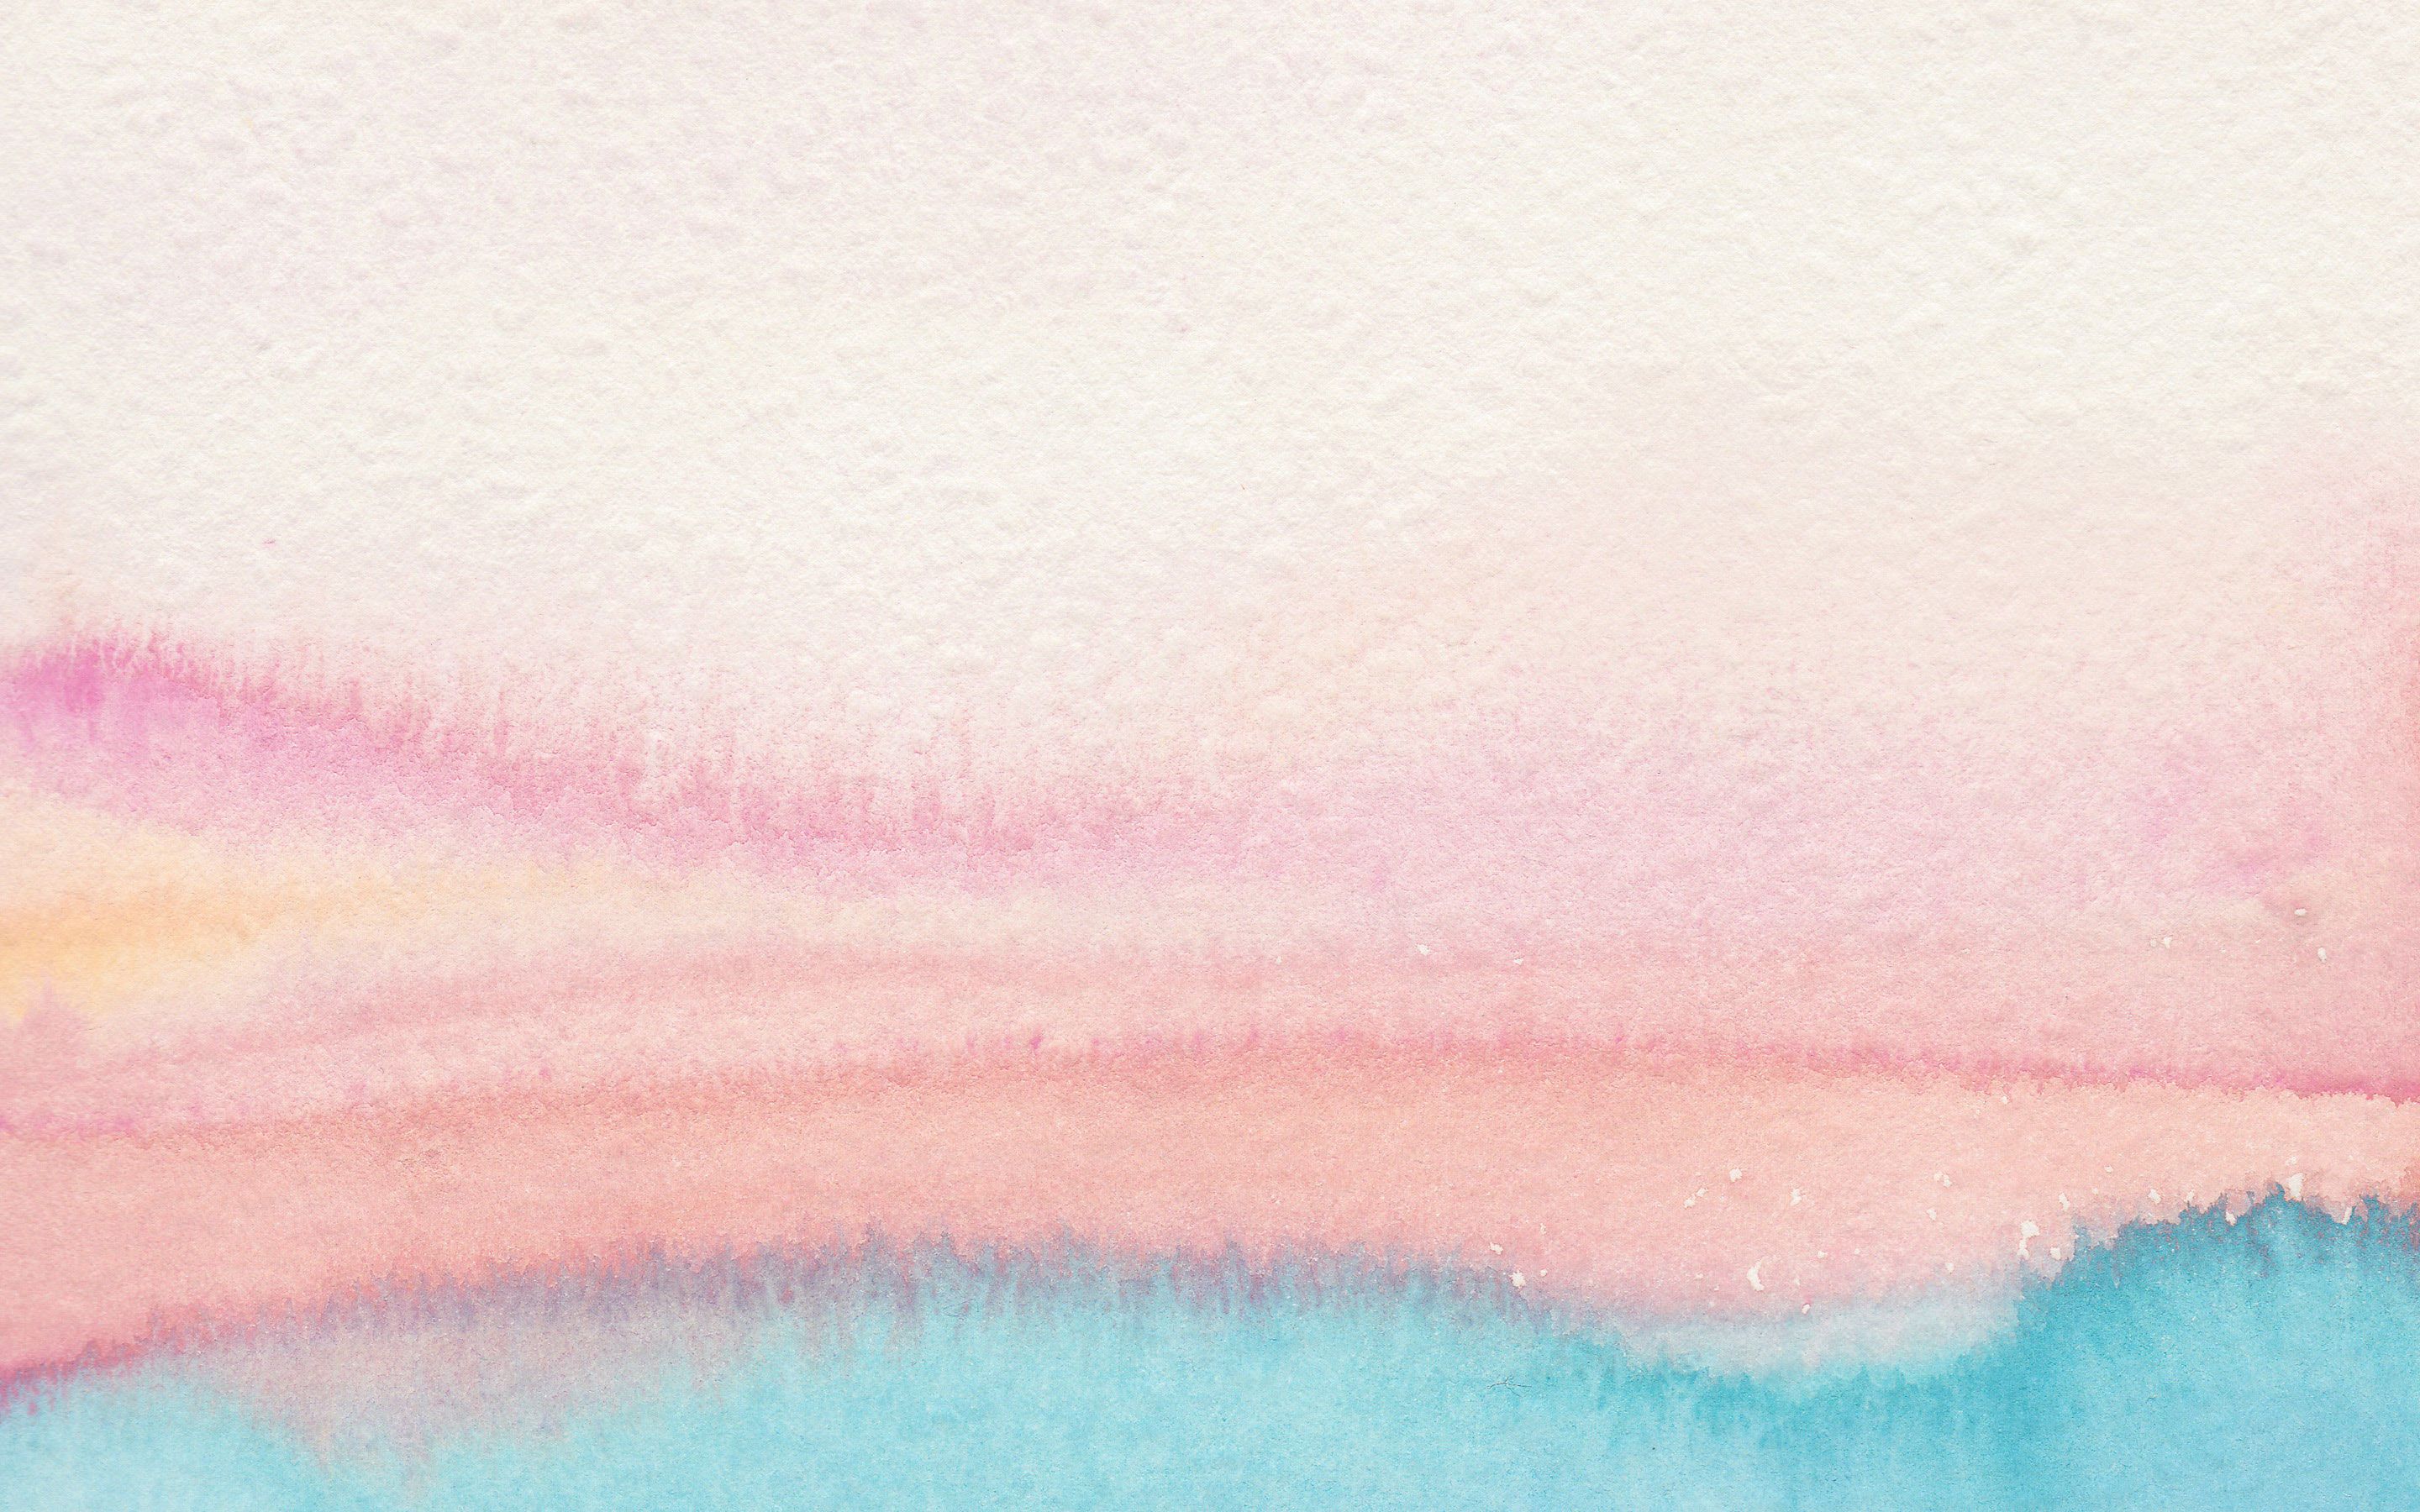 Pastel Macbook Minimalist Wallpaper HD For Android